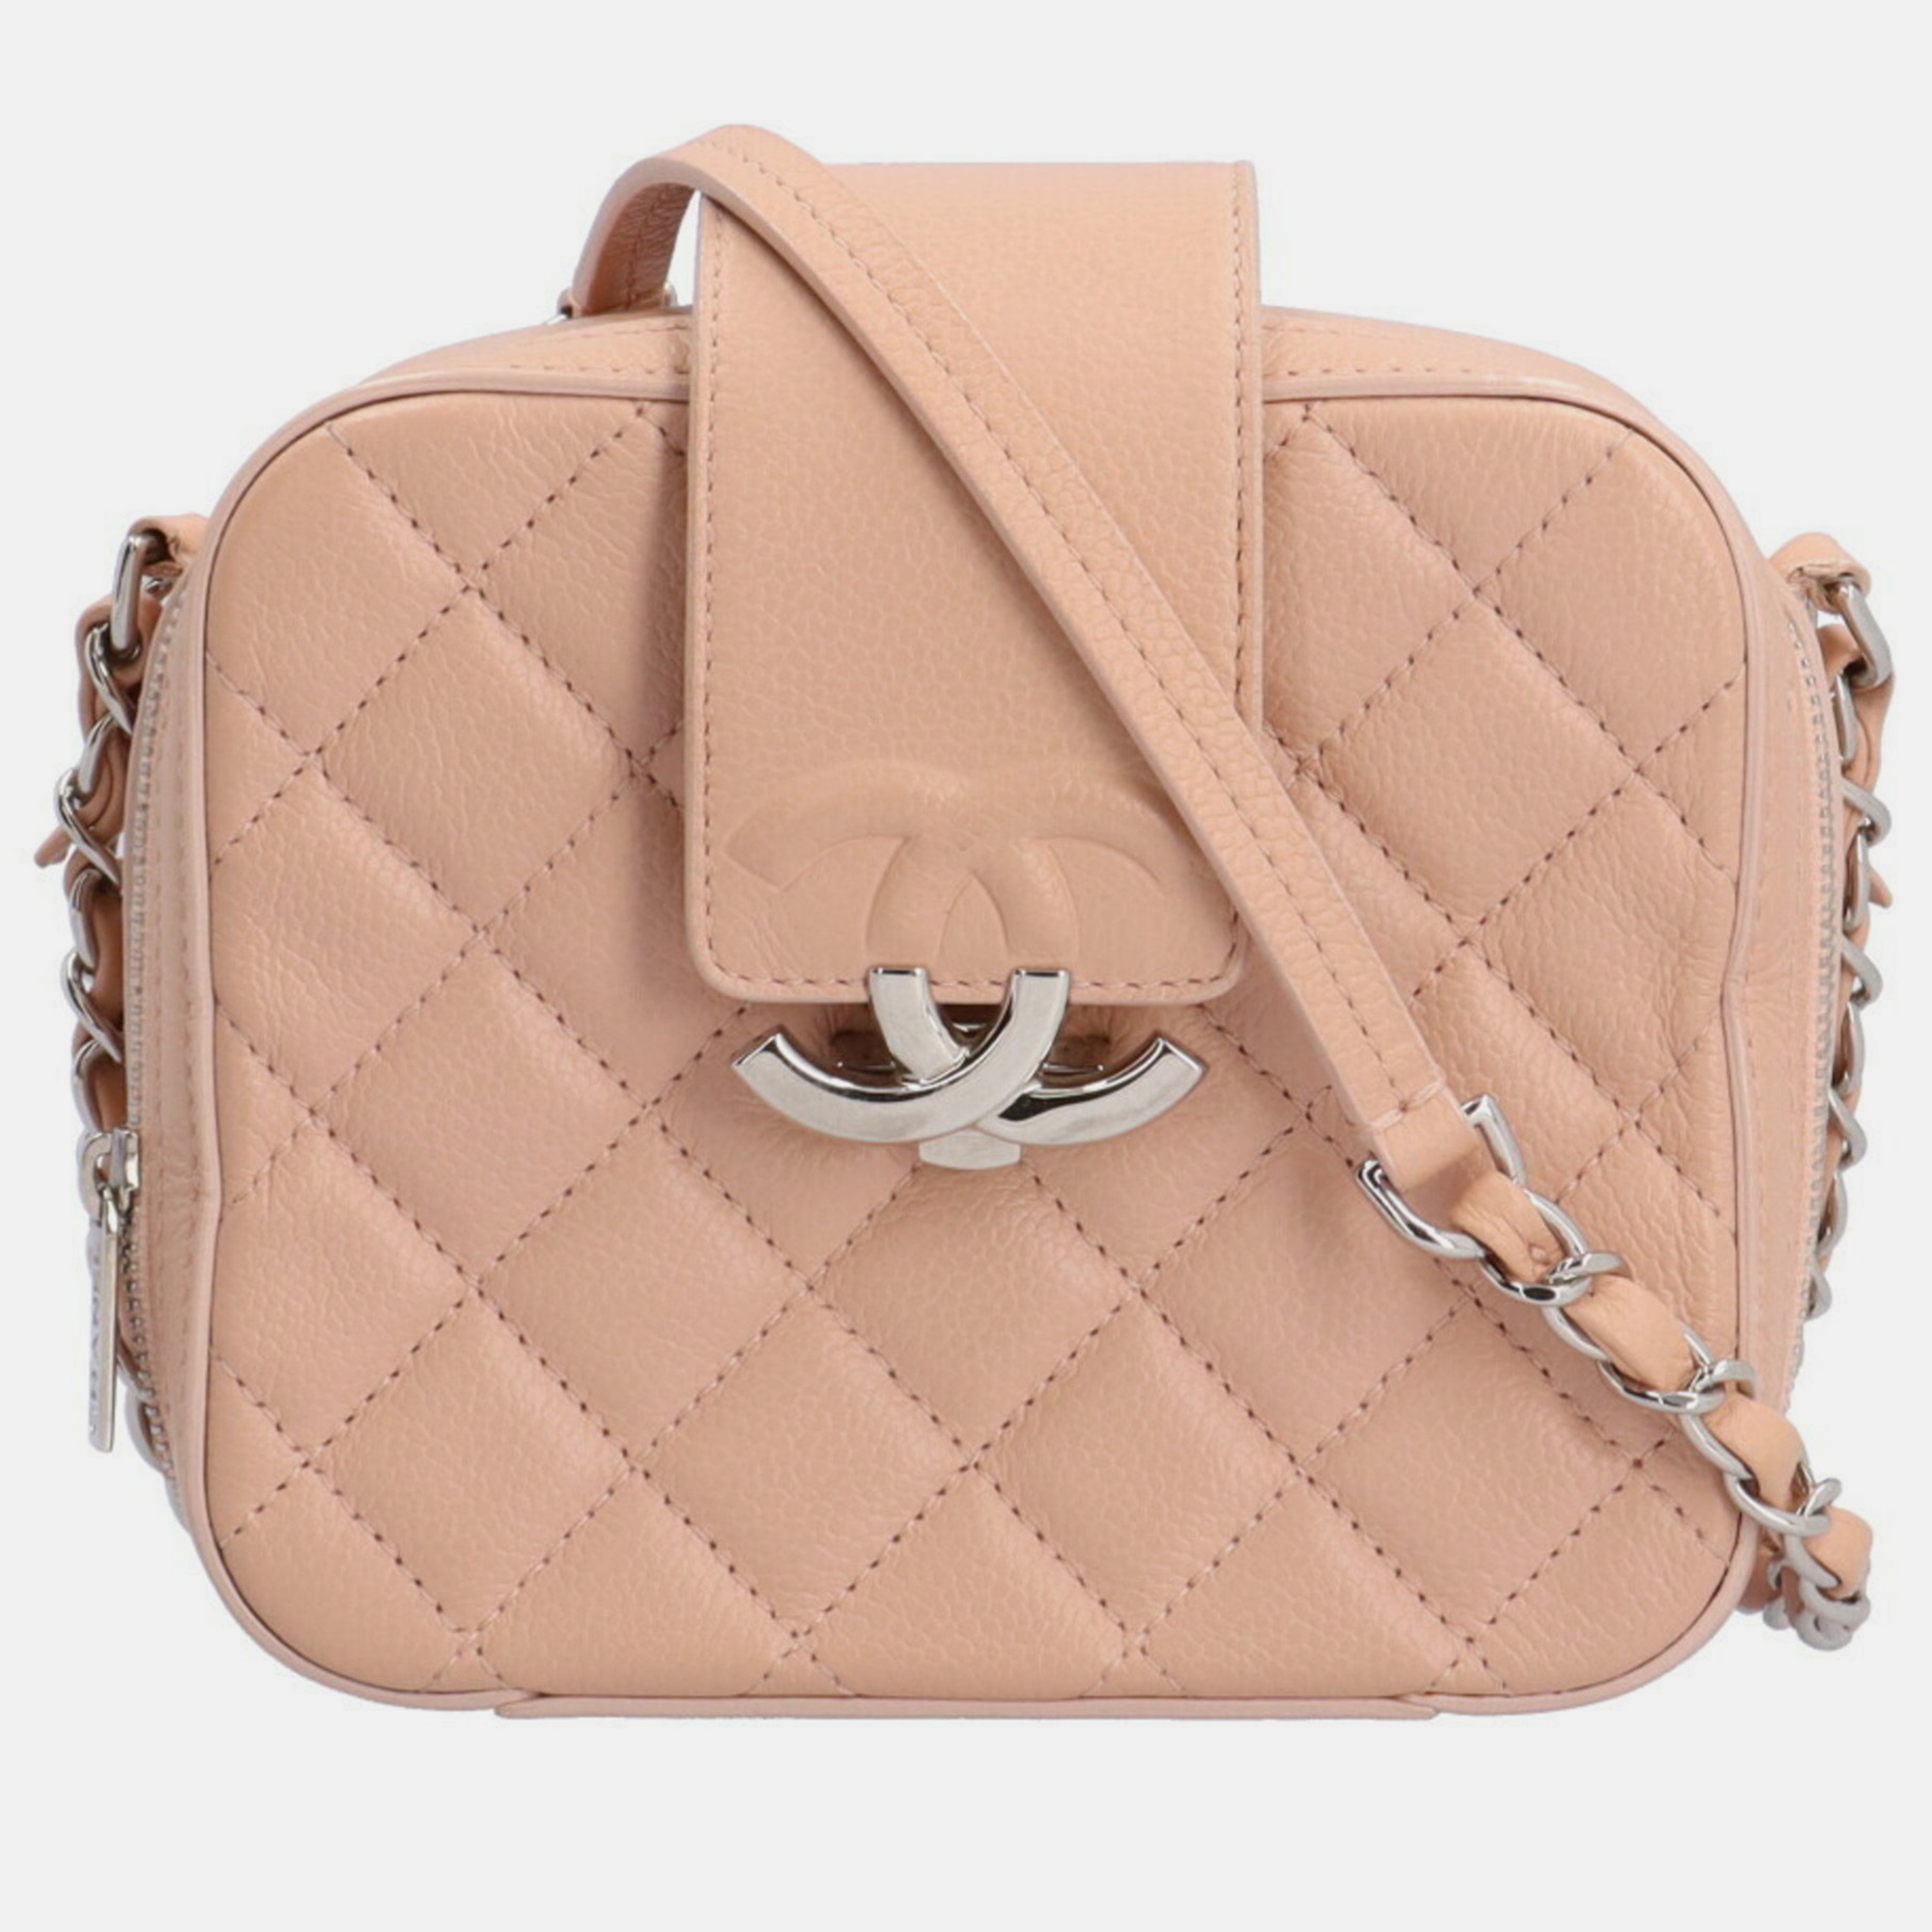 Chanel pink quilted leather camera crossbody bag